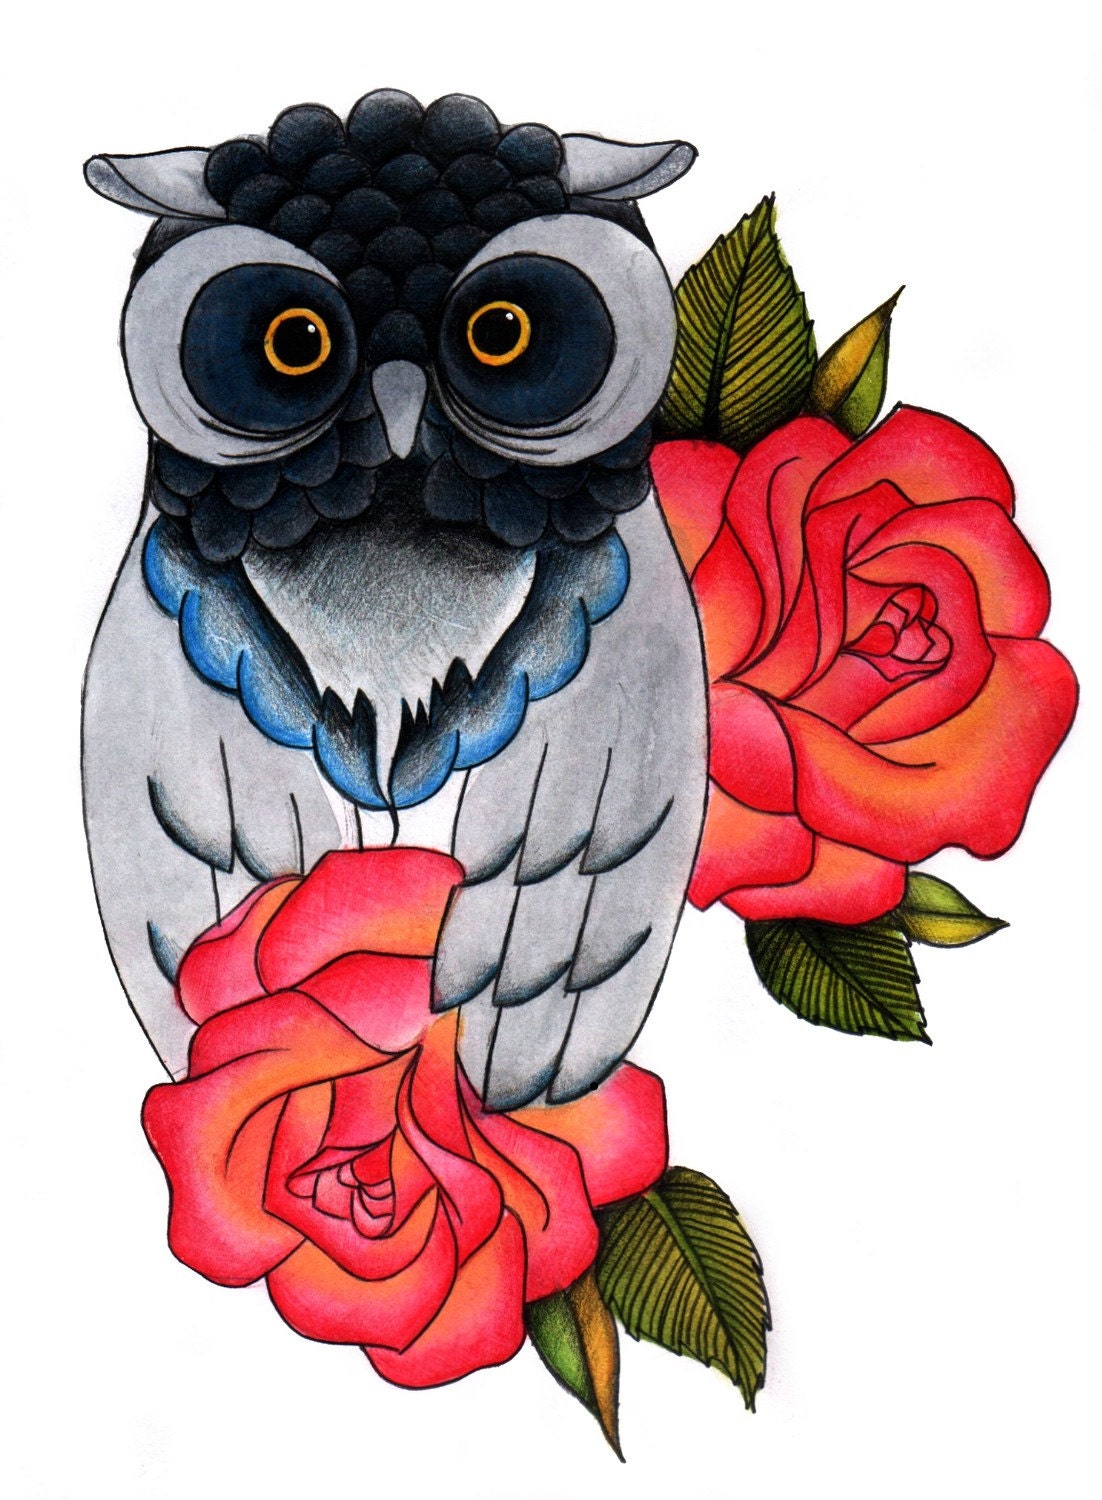 Tattoo Old School Style Owl And Roses Design painting PRINT 570x775px